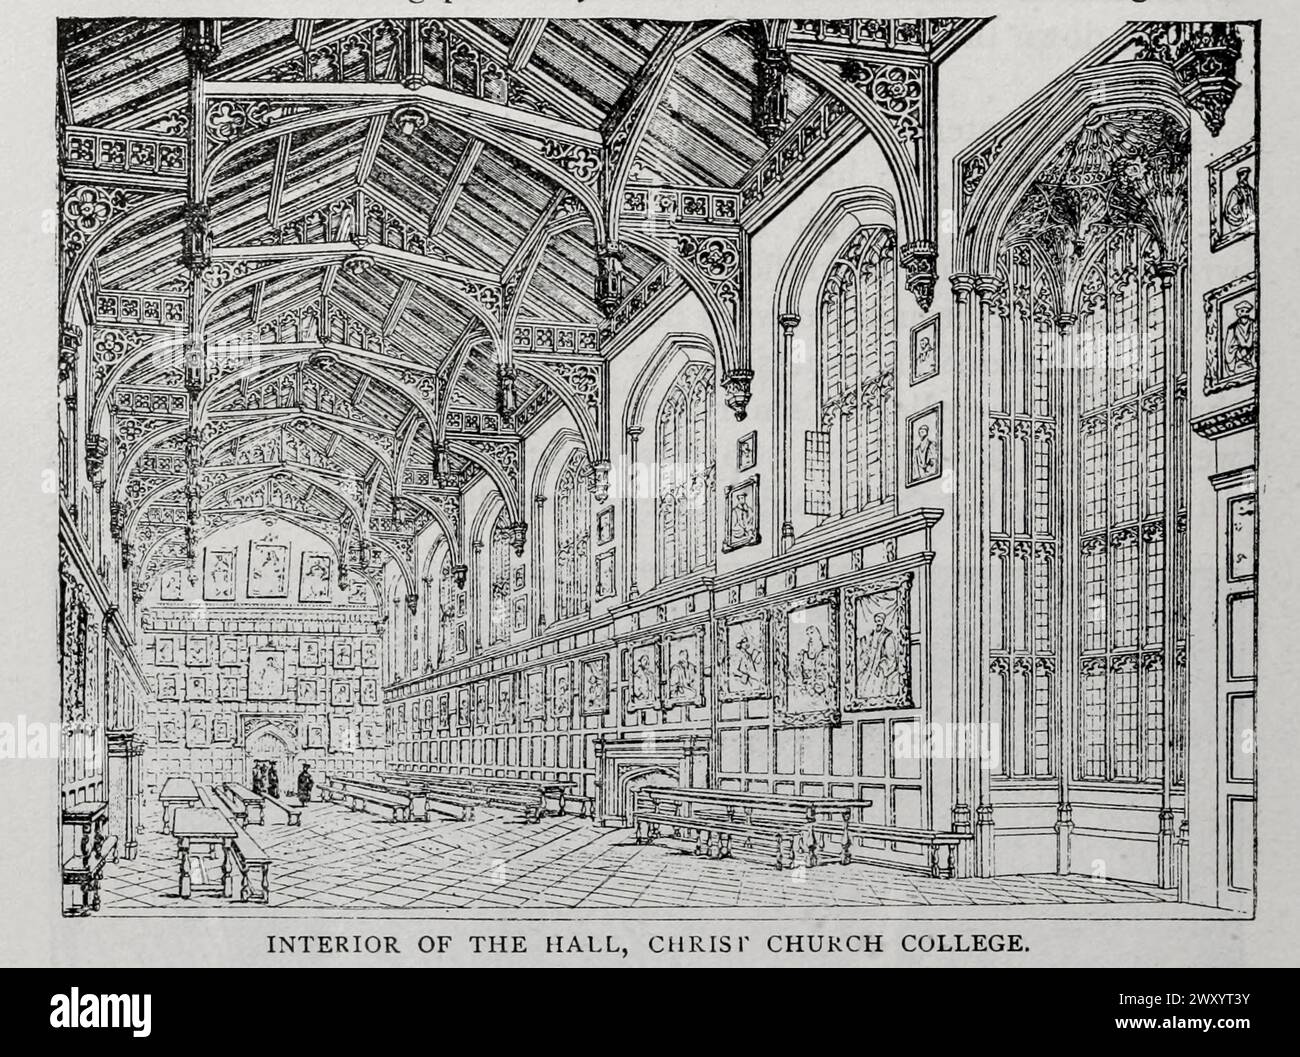 INTERIOR OF THE HALL, CHRIST CHURCH COLLEGE. from the Article THE BUILDINGS OF OXFORD, FROM AN ENGINEER'S POINT OF VIEW. By J. W. Parry.  from The Engineering Magazine Devoted to Industrial Progress Volume XVI October 1898 - March 1899 The Engineering Magazine Co Stock Photo